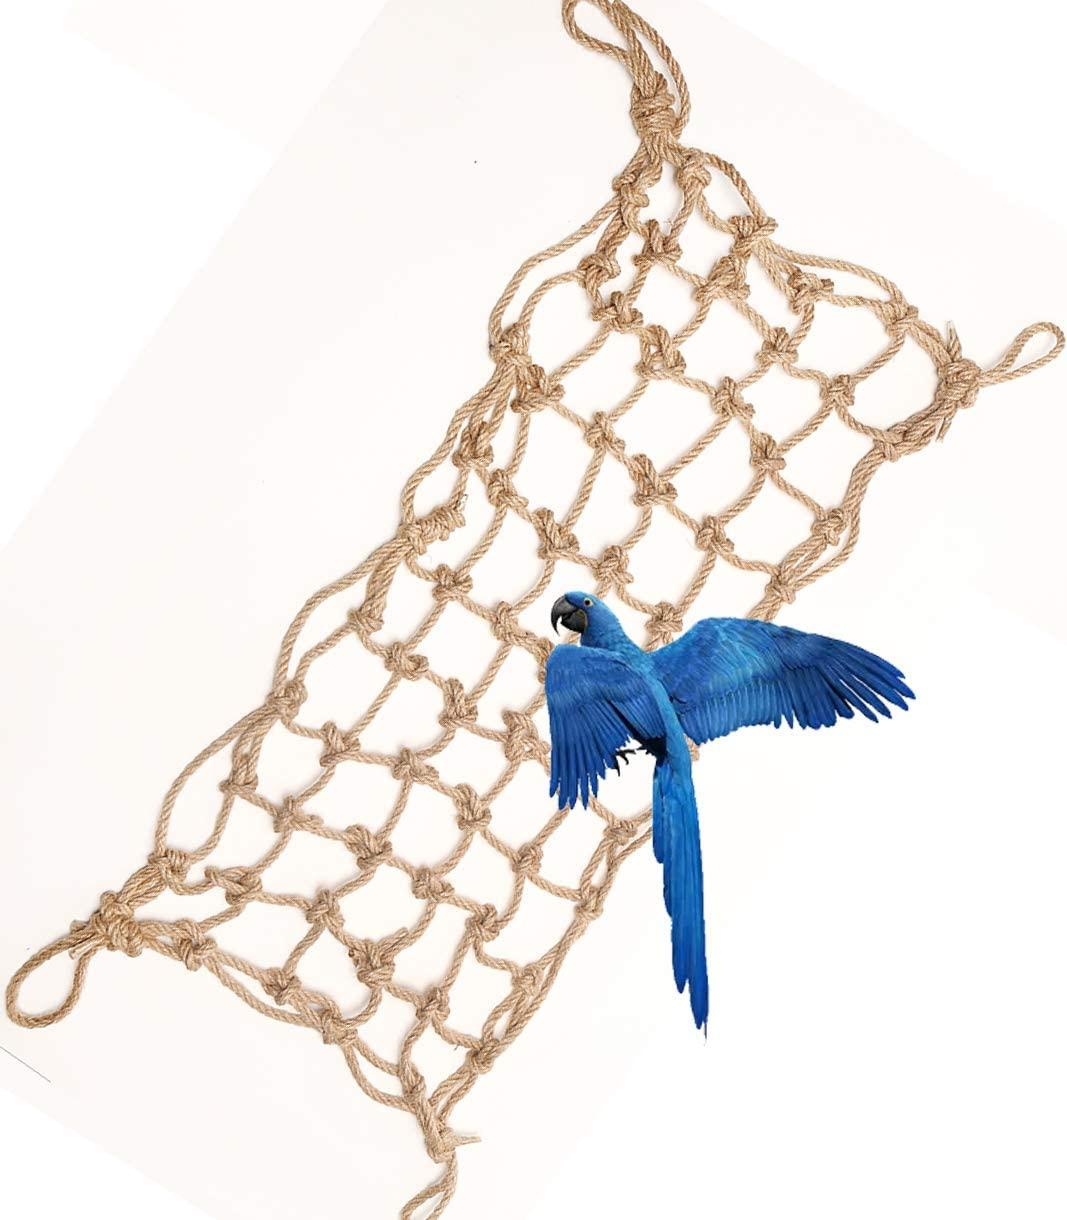 Bird Hemp Rope Net Swing,Parrot Perch Climbing Rope Ladder,Hammock Hanging  on Parakeet Cage wiht 2 Hooks,Chew Toys for Greys  Cockatoo,Cockatiel,Conure,Lovebirds,Canaries,Little Macaw 13.8 x 23.6